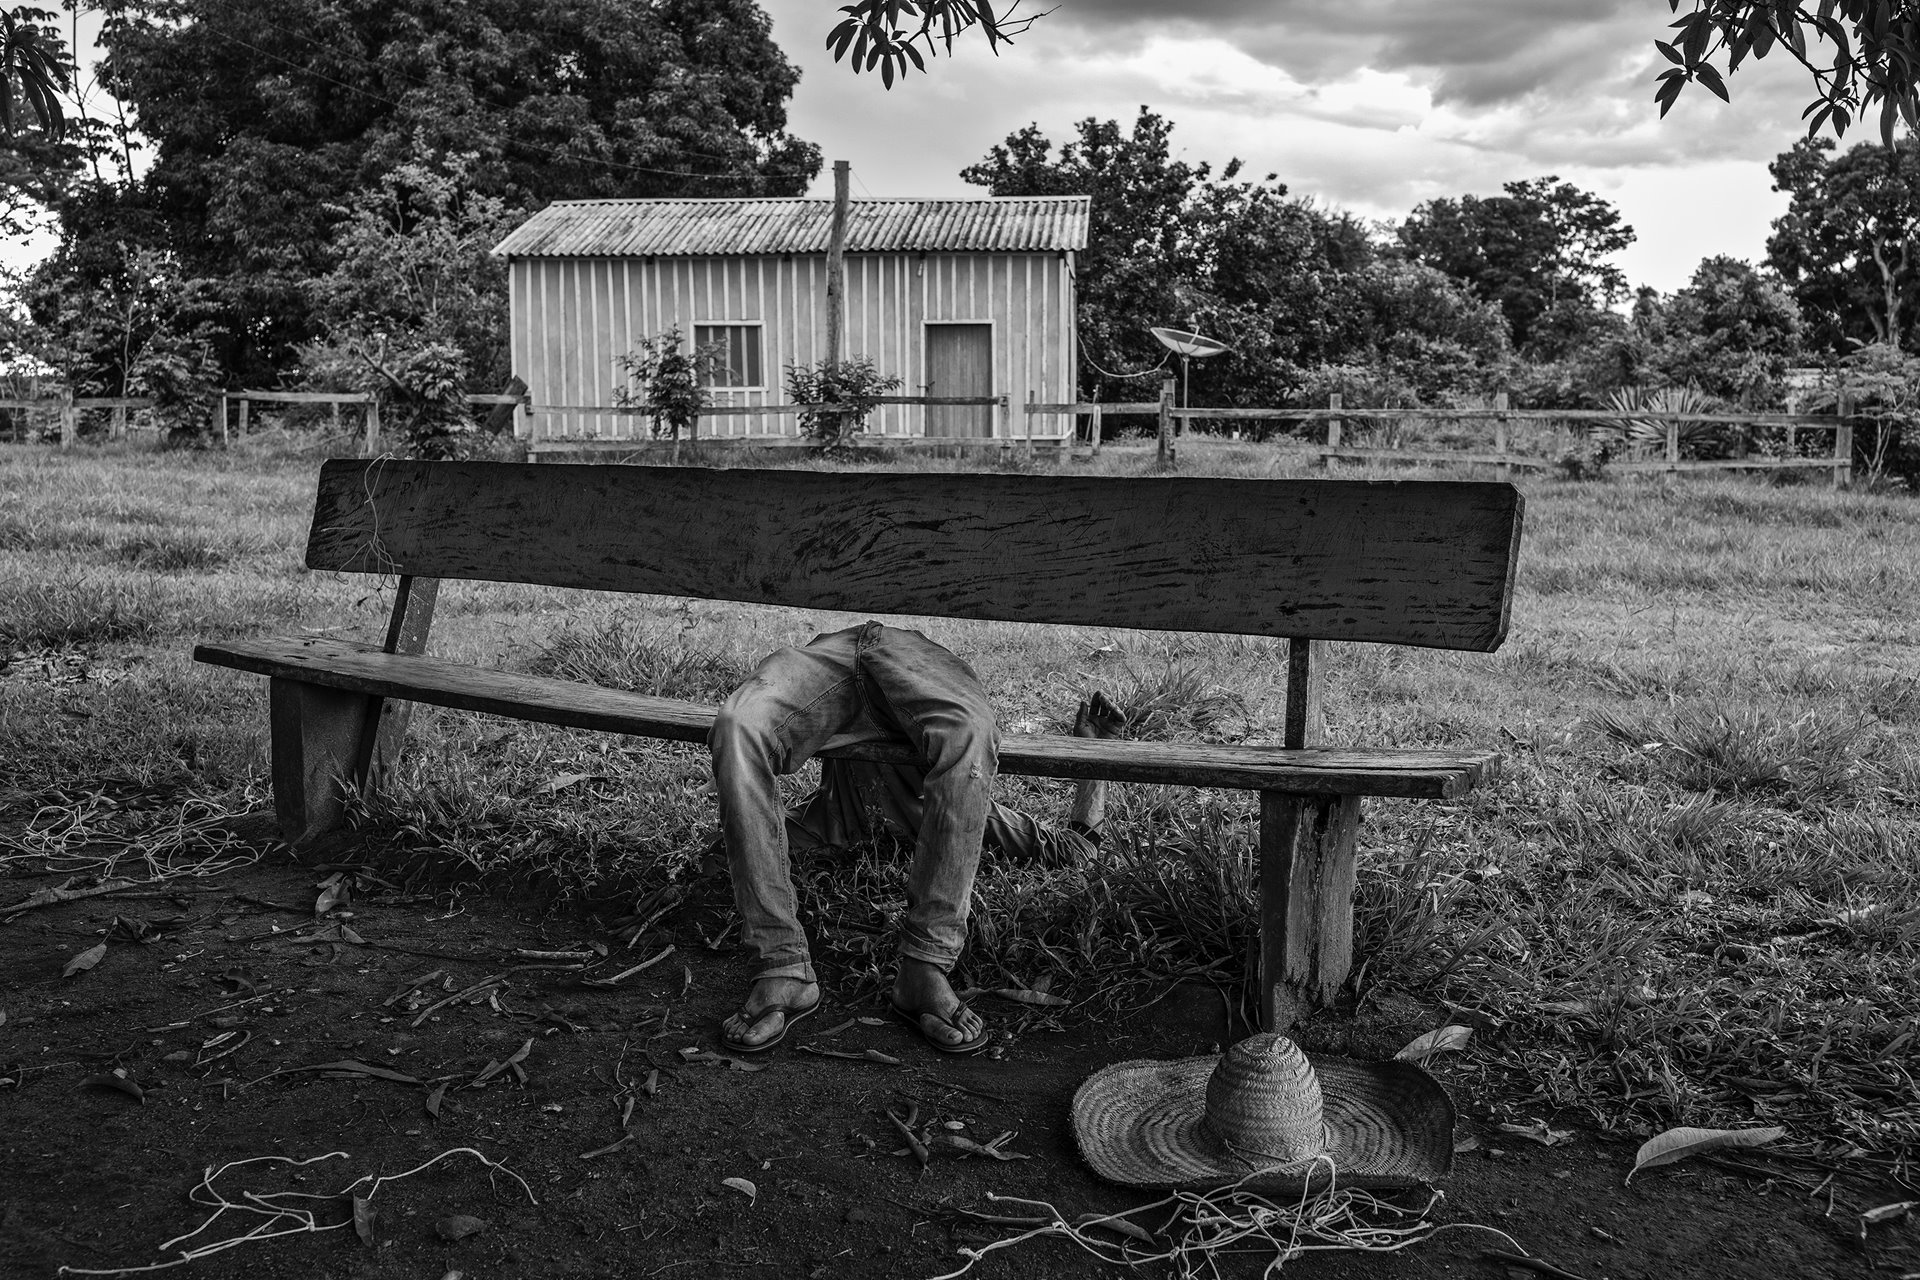 A member of the Quilombola community &ndash;&ensp;an Afro-Brazilian community consisting of Black Brazilians, some of whom are descendants of enslaved peoples from the African continent &ndash; lies passed out drunk on a bench, in Pedras Negras, São Francisco do Guaporé, Rondônia, Brazil. The process of providing land deeds to communities started by former enslaved people was already slow before Jair Bolsonaro&#39;s election. It has now stalled completely, as a result of the president&rsquo;s resolve not to demarcate further land for such communities in the Amazon.